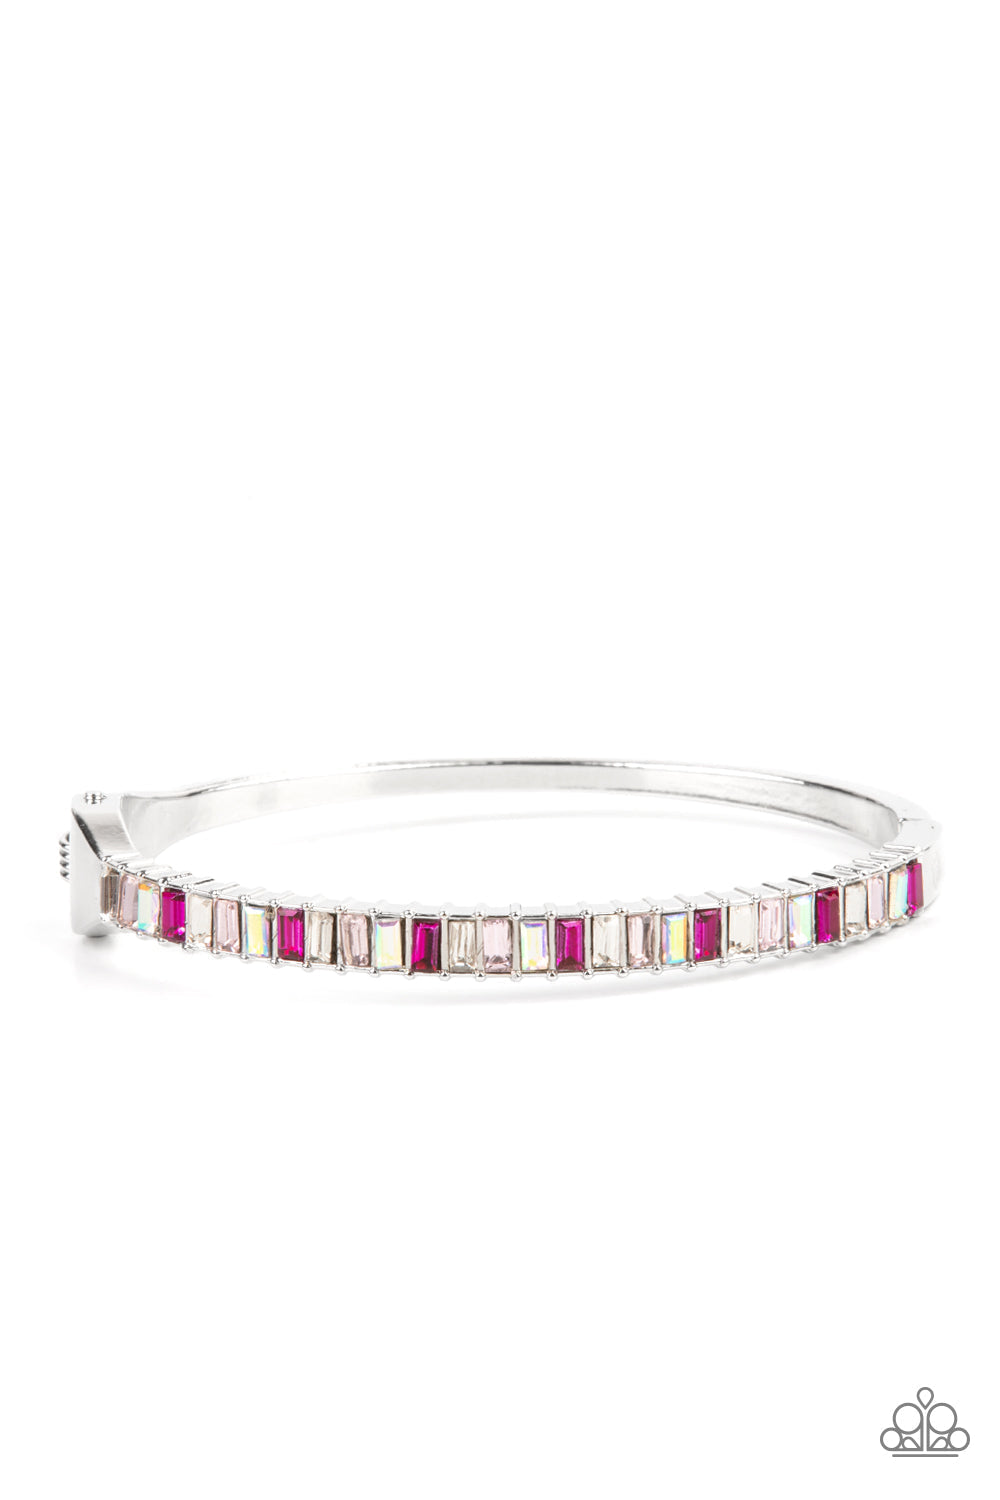 Toast to Twinkle - Pink Bling - Silver Hinge Closure Bracelet - Paparazzi Accessories -Regal emerald style cuts, a dainty row of pink and white rhinestones across the front of a silver cuff-like bangle for a timeless fashion bracelet. 